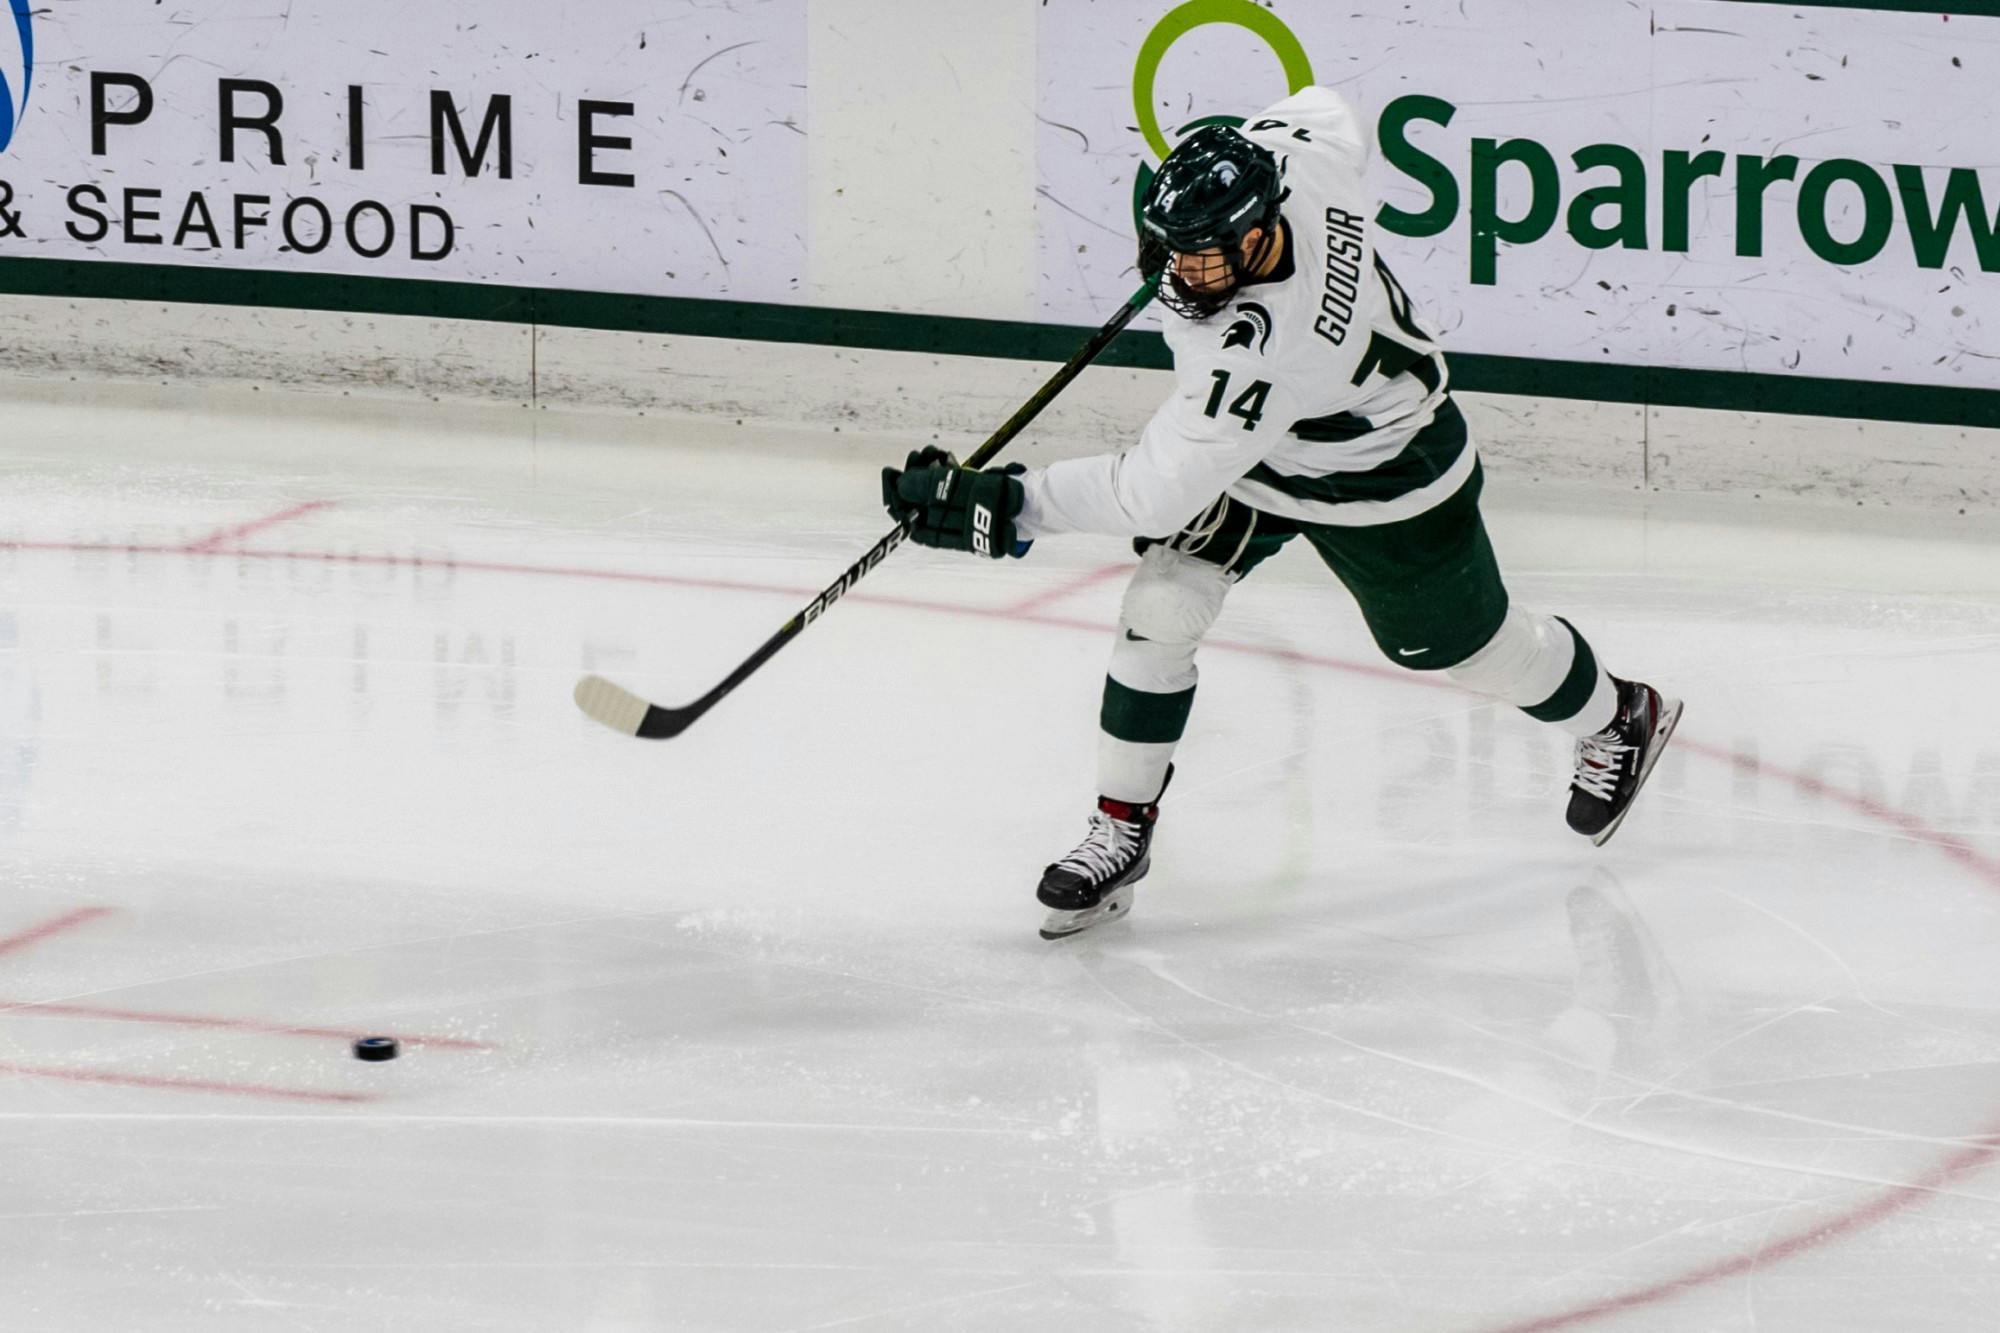 <p>Sophomore forward Adam Goodsir (14) shoots the puck against Notre Dame. The Spartans were defeated by the Fighting Irish, 2-1, at Munn Ice Arena on November 22, 2019. </p>